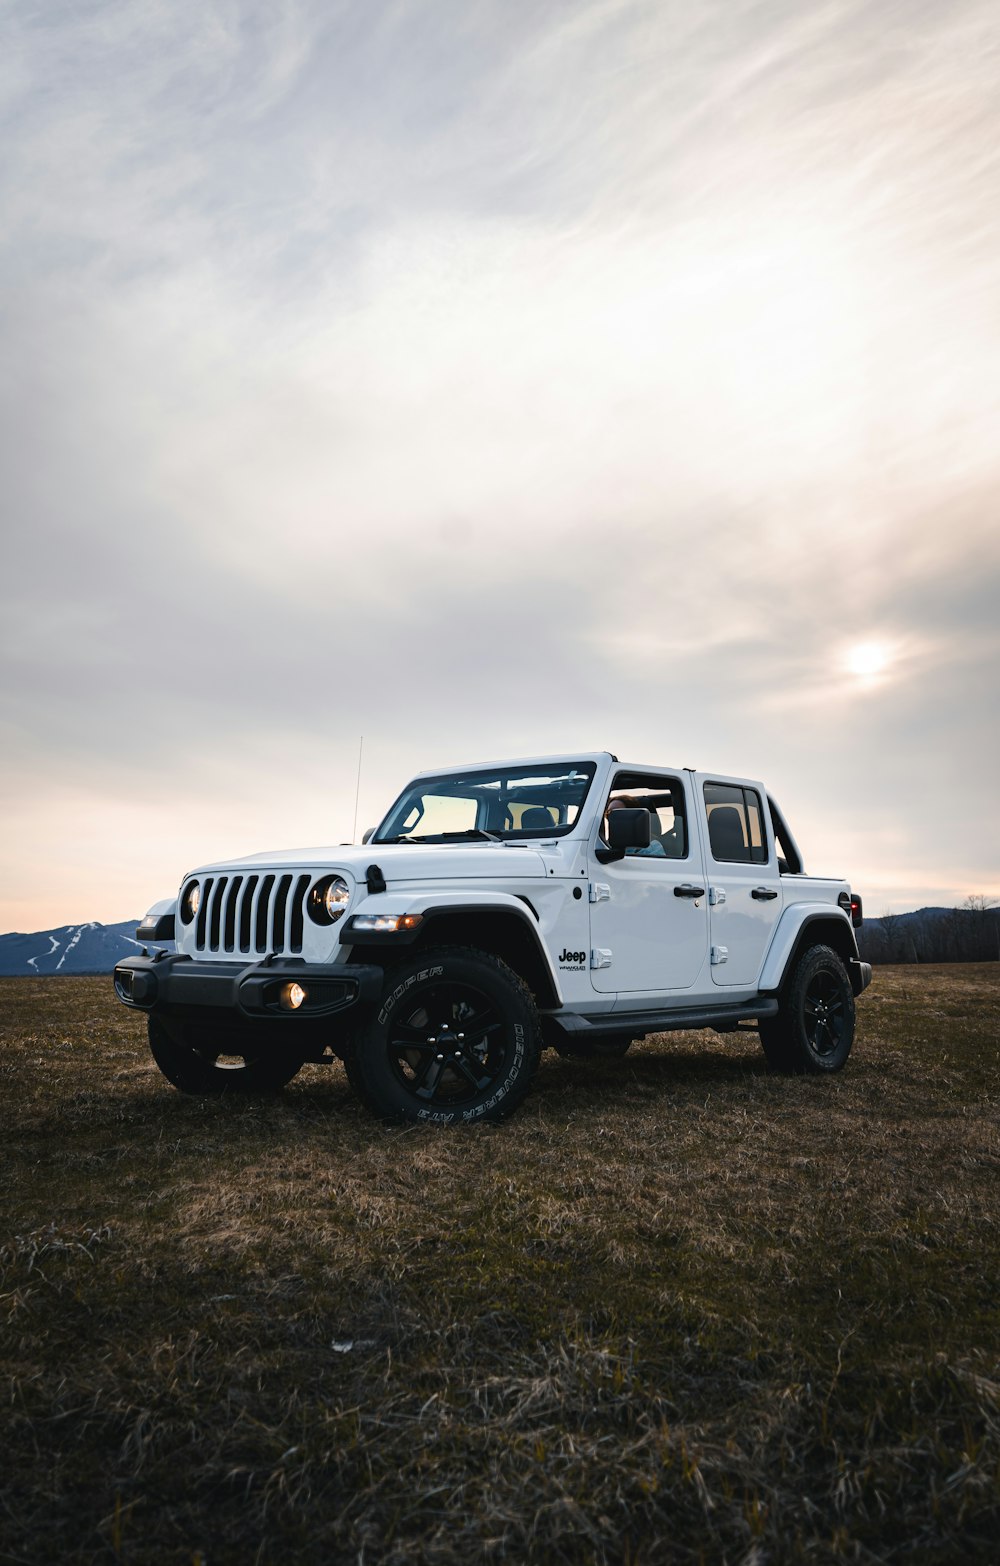 Black Jeep Wrangler In Front Of Gray Concrete Wall Photo Free Grey Image On Unsplash